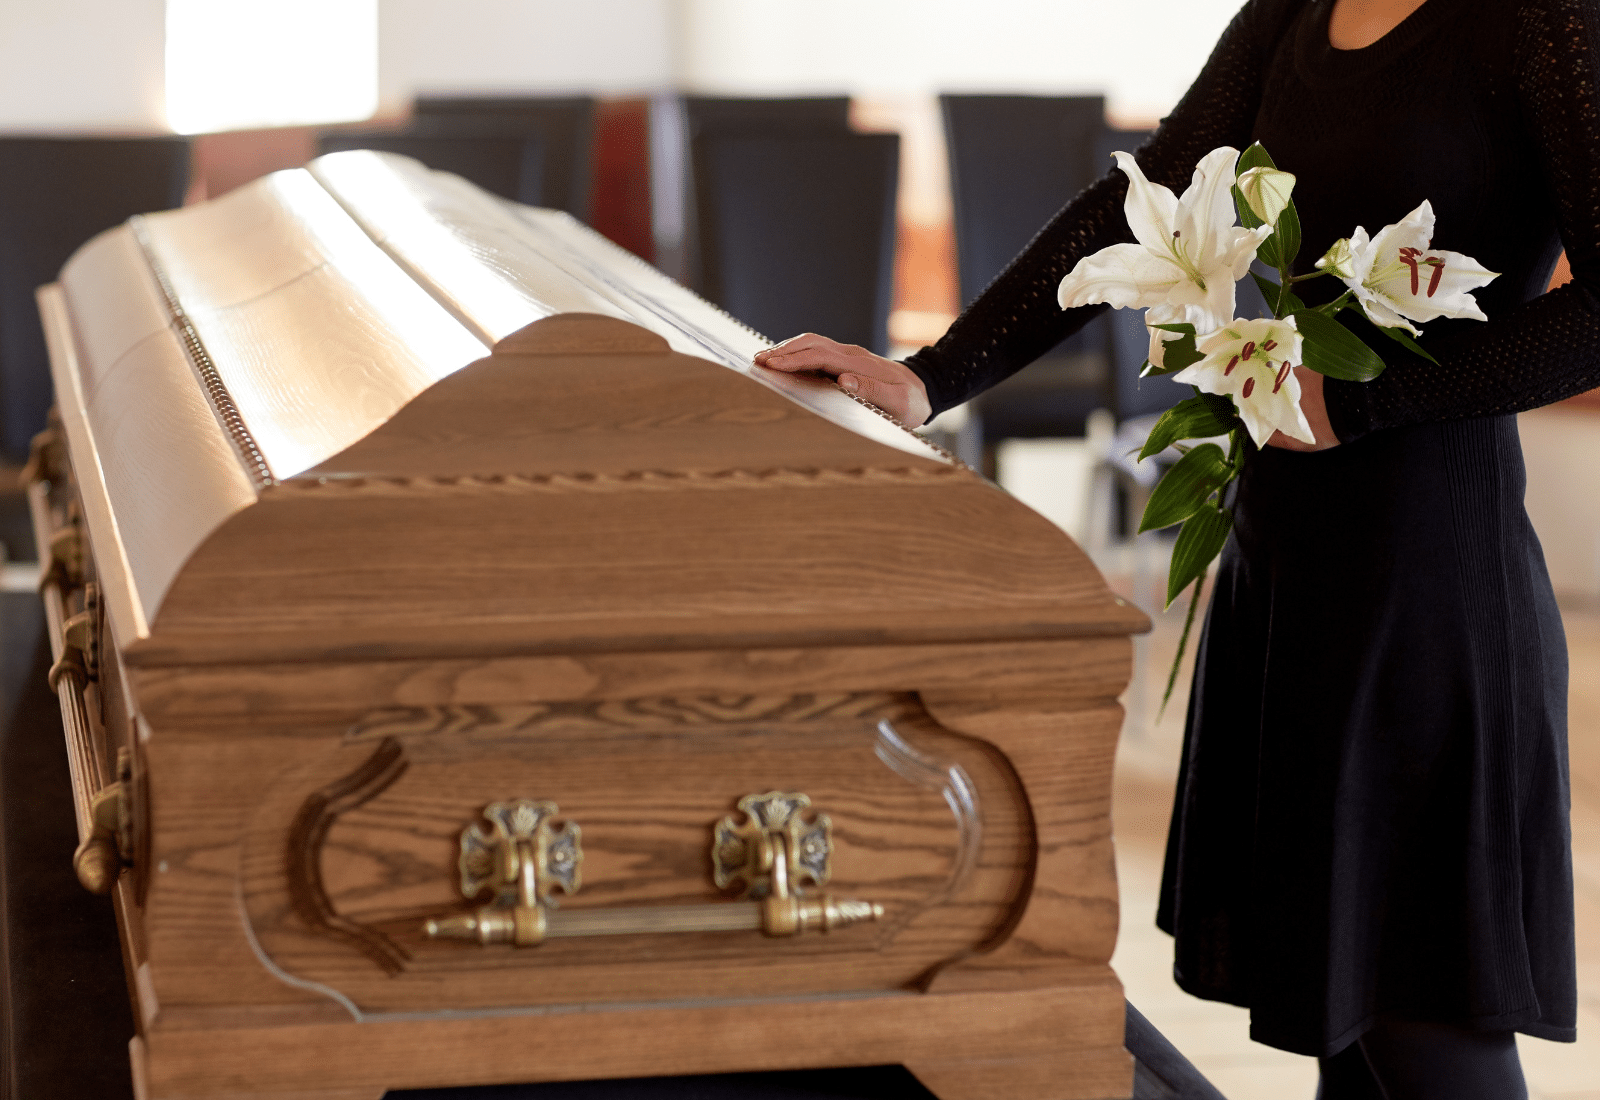 Image of a woman holding flowers beside a casket